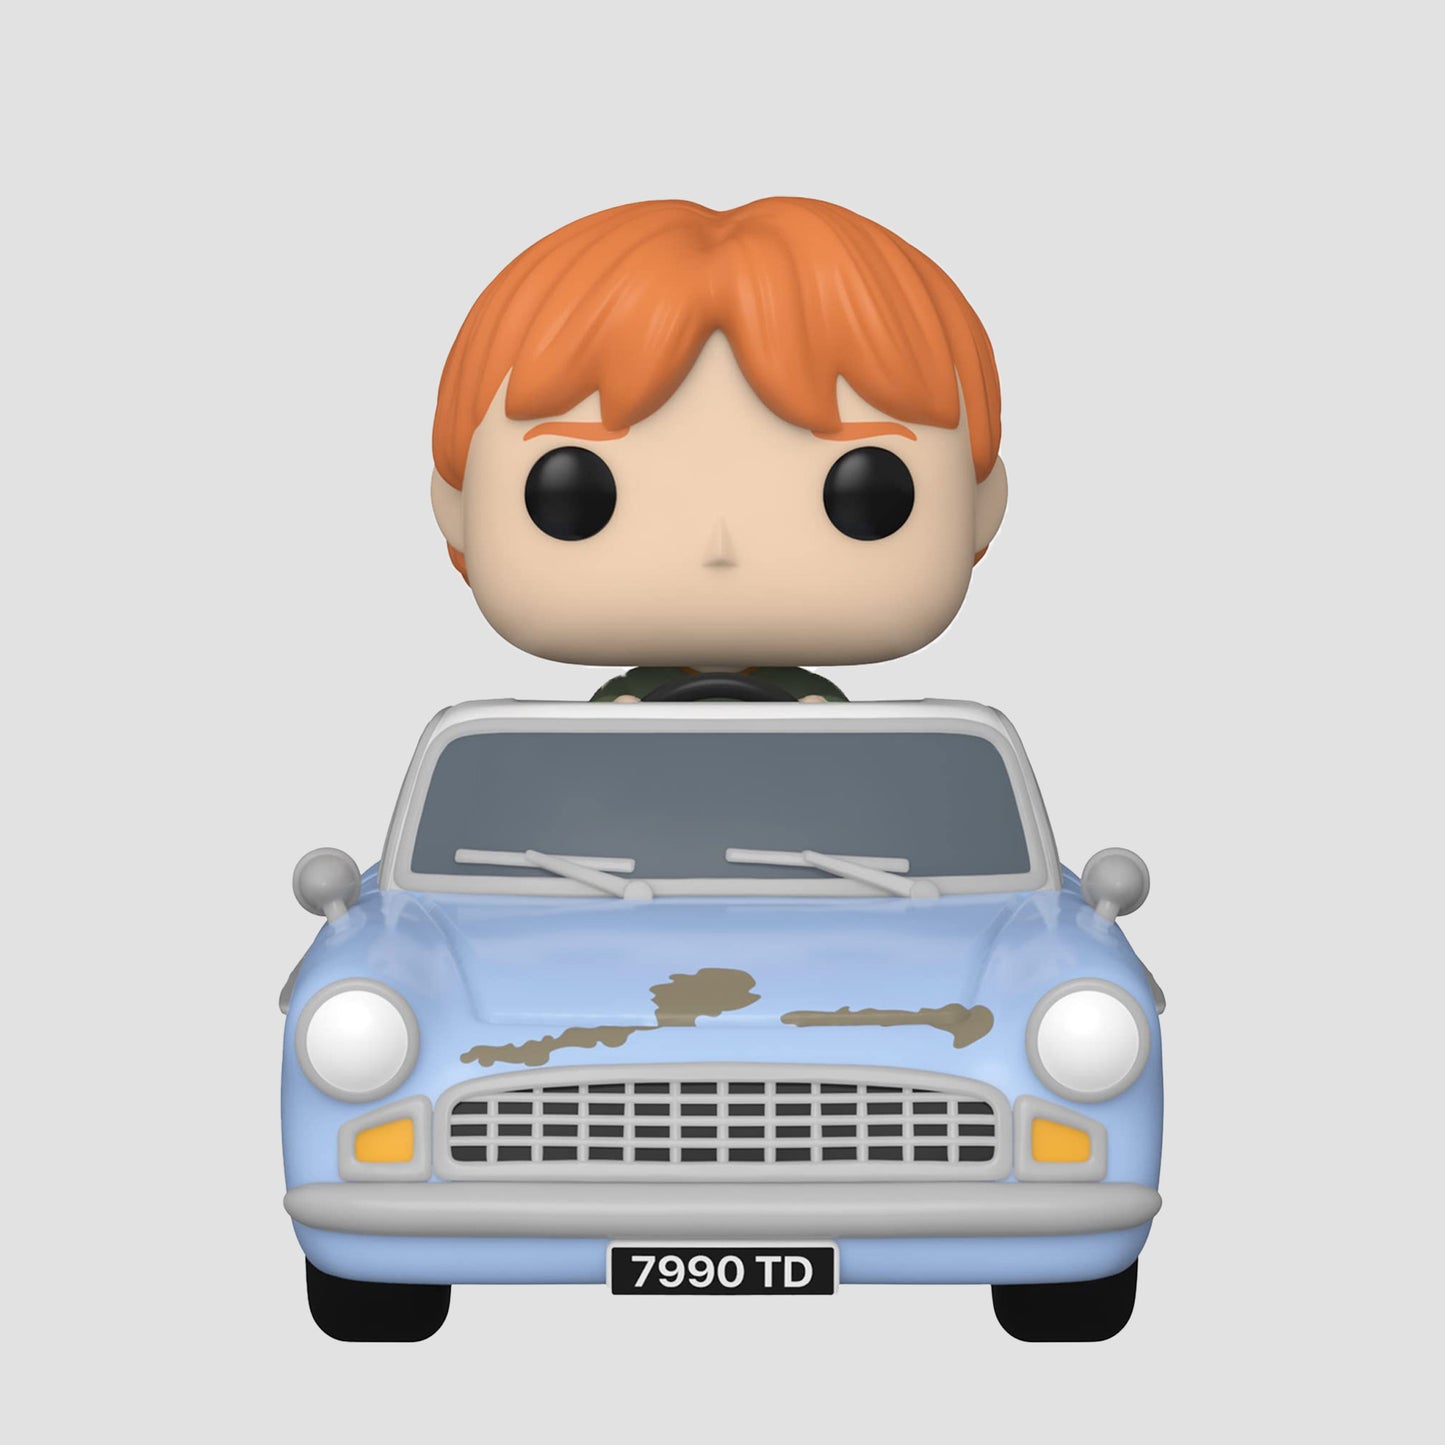 Load image into Gallery viewer, Ron Weasley in Flying Car (Harry Potter) Funko Pop! Rides
